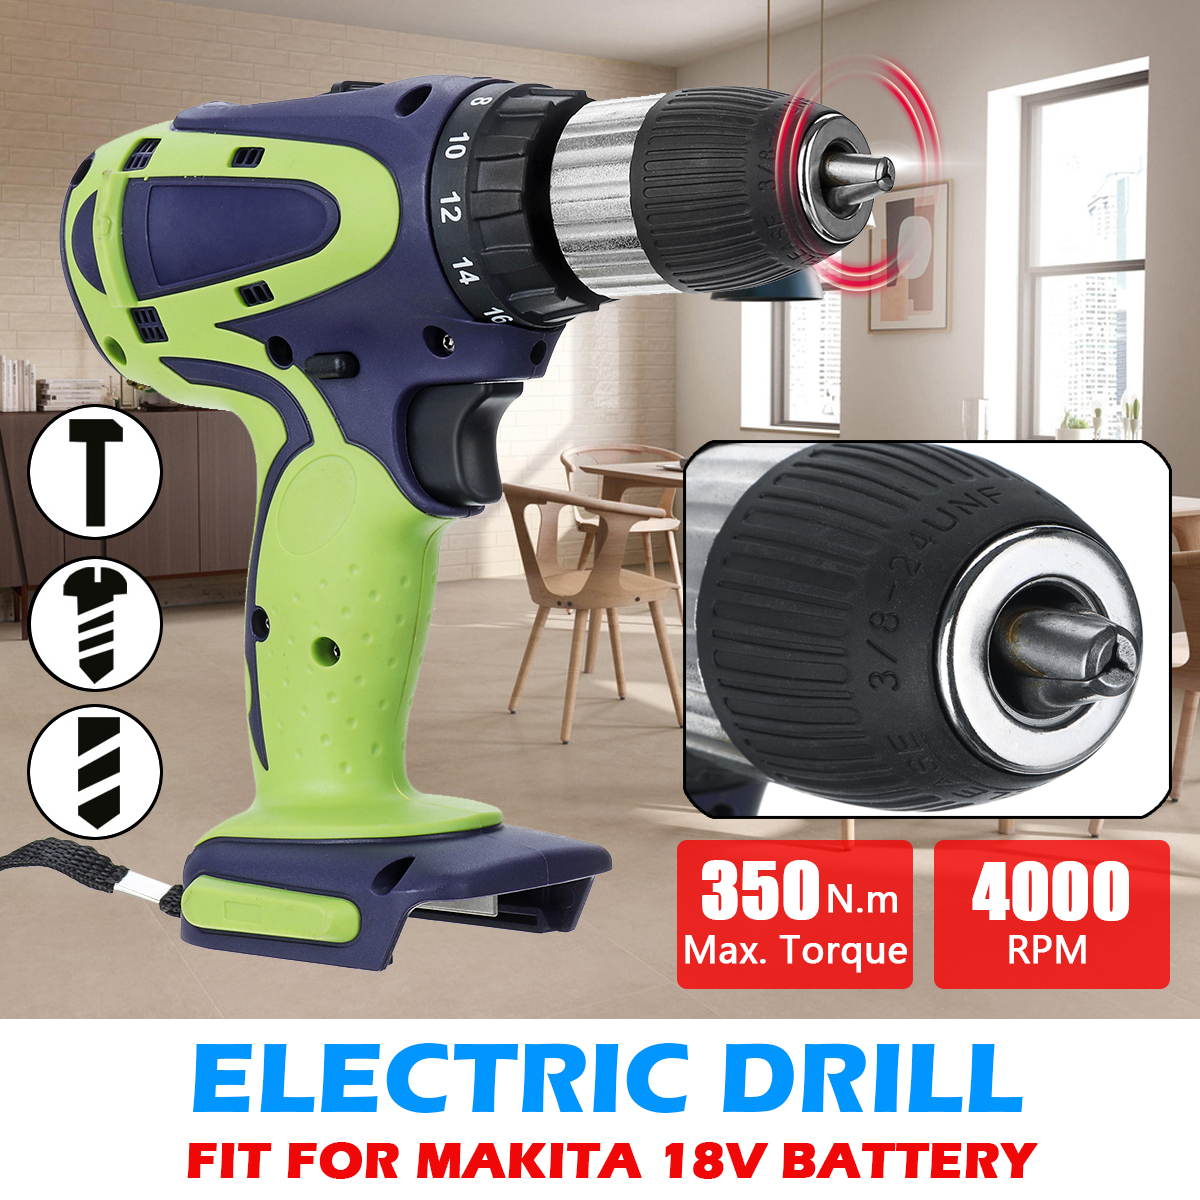 13mm-Chuck-Cordless-Electric-Drill-For-Makita-18V-Battery-4000RPM-LED-Light-Power-Drills-350Nm-1642844-2